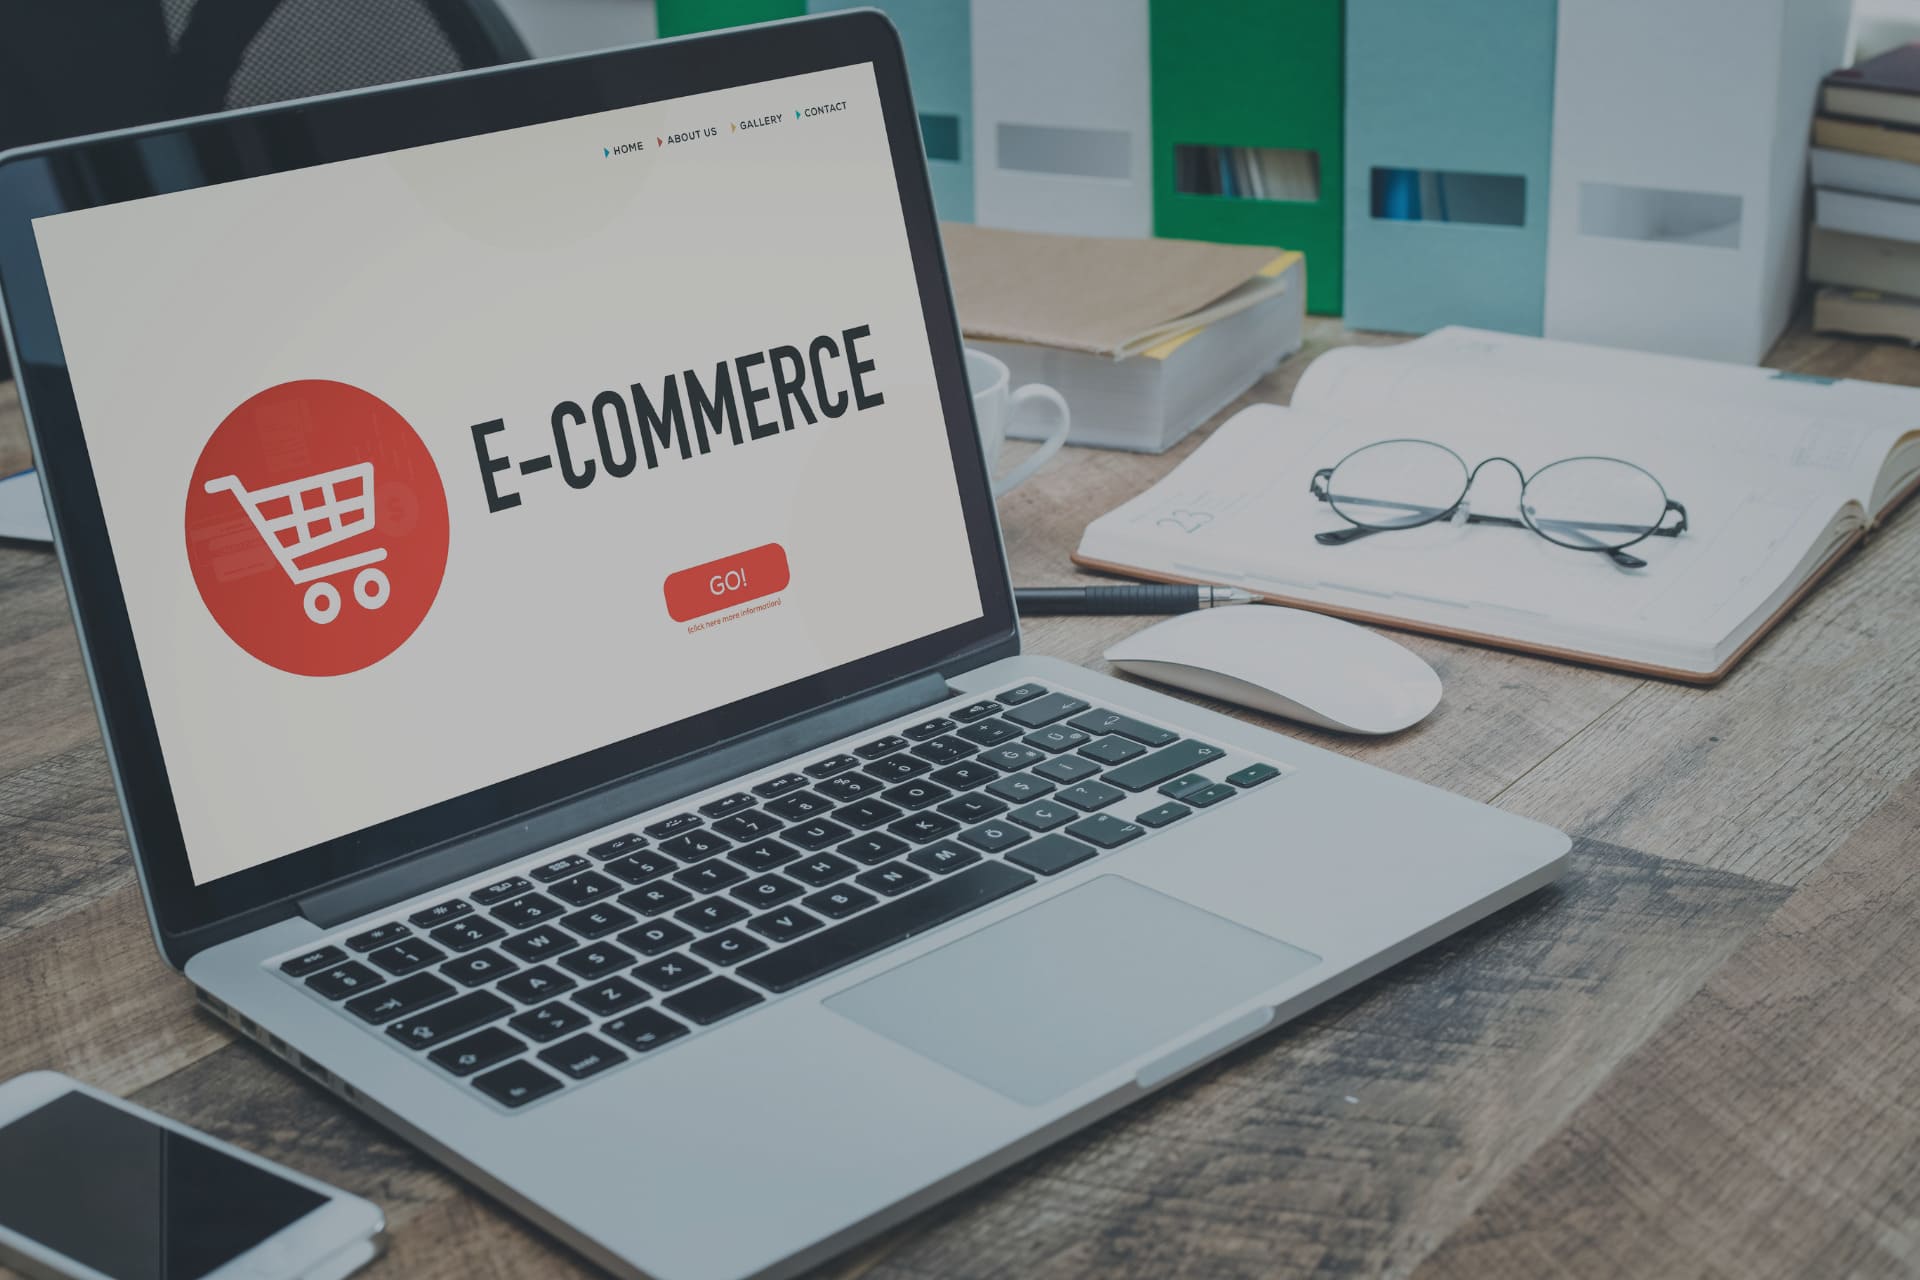 Opening an e-commerce company in Thailand